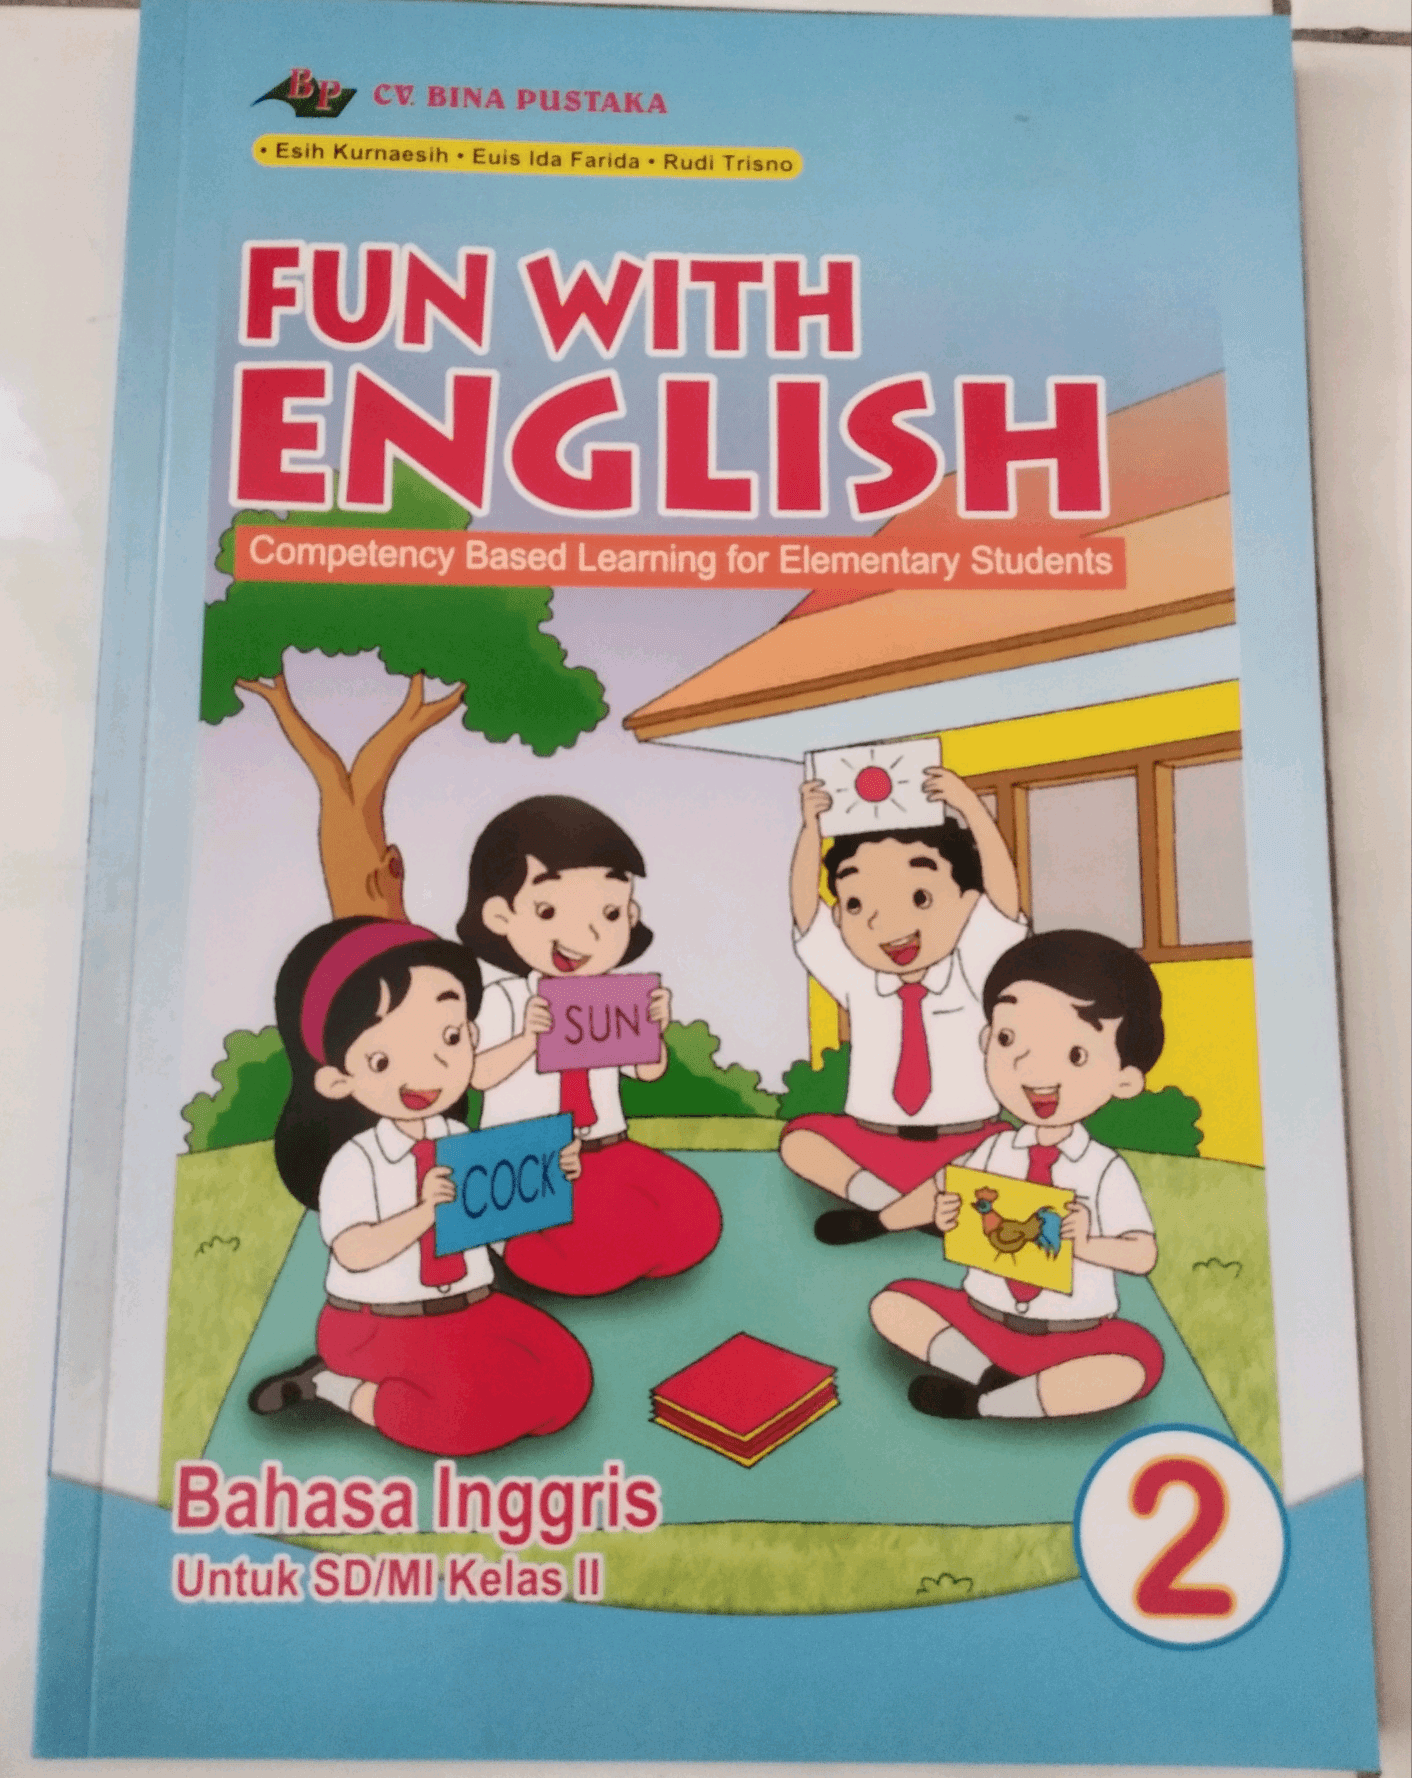 Bahasa Inggris kelas 2 SD questions & answers for quizzes and